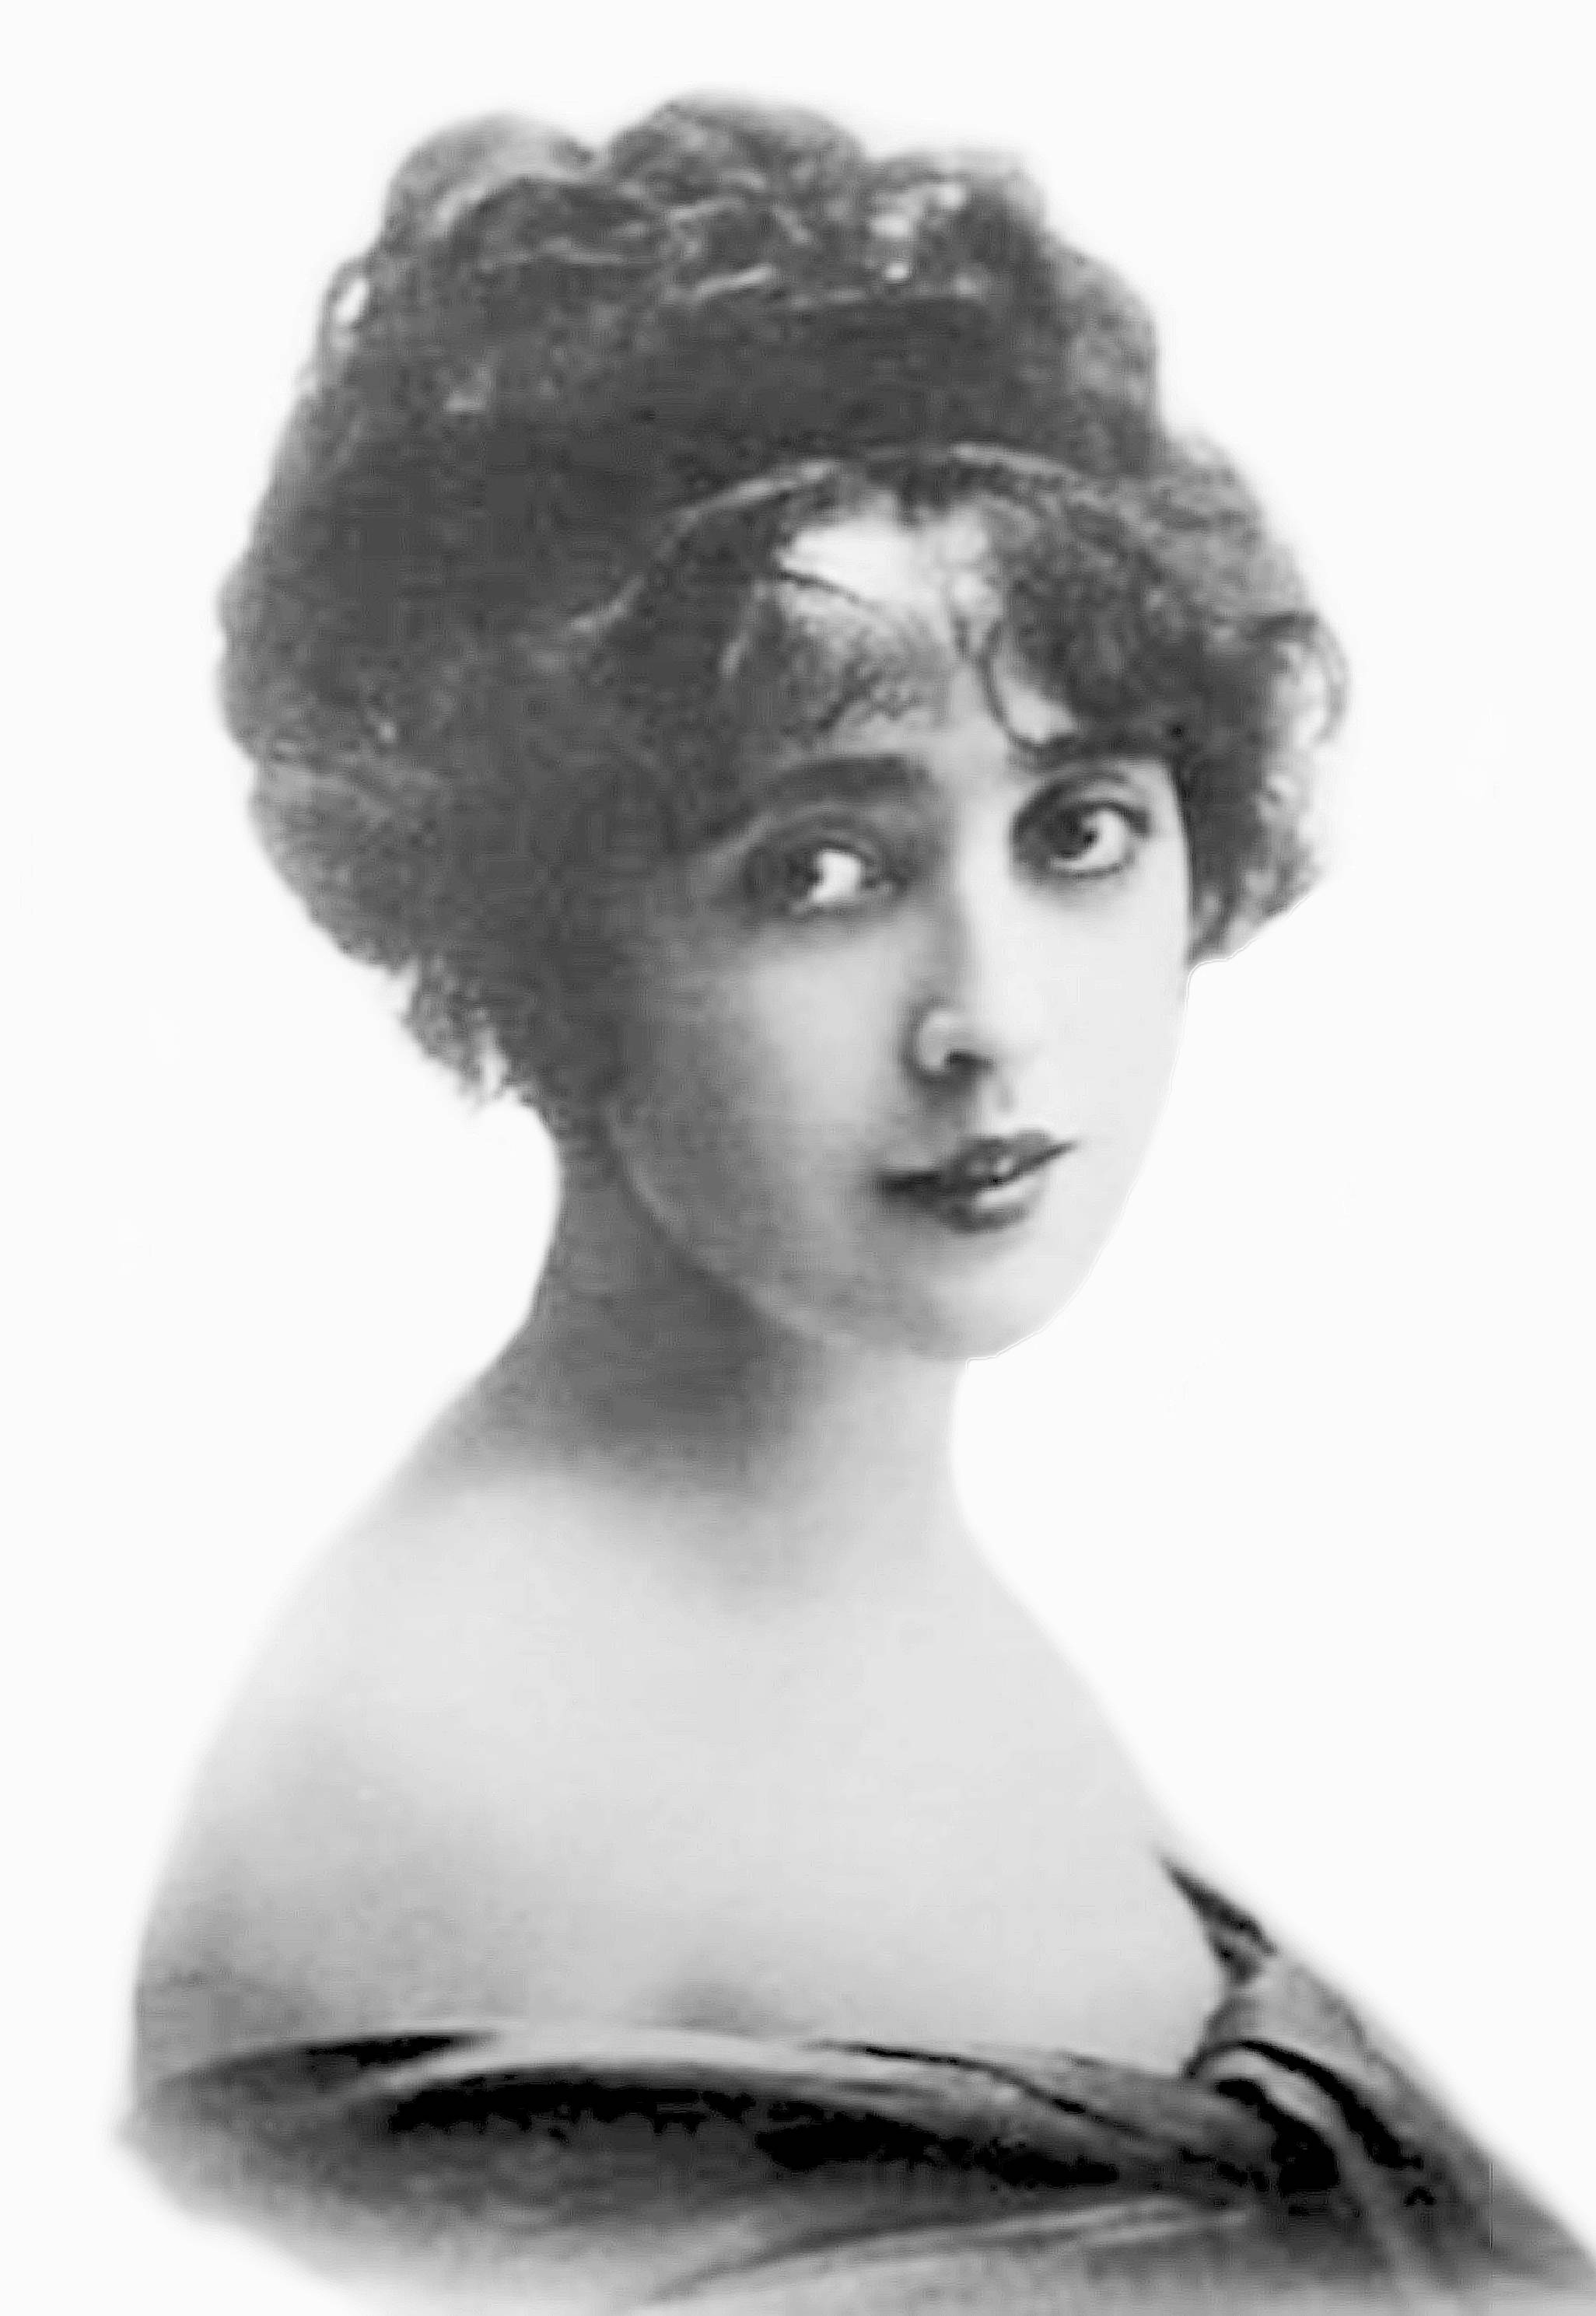 PHOTO – MOVIE STAR – MABEL NORMAND - x-photo-movie-star-mabel-normand